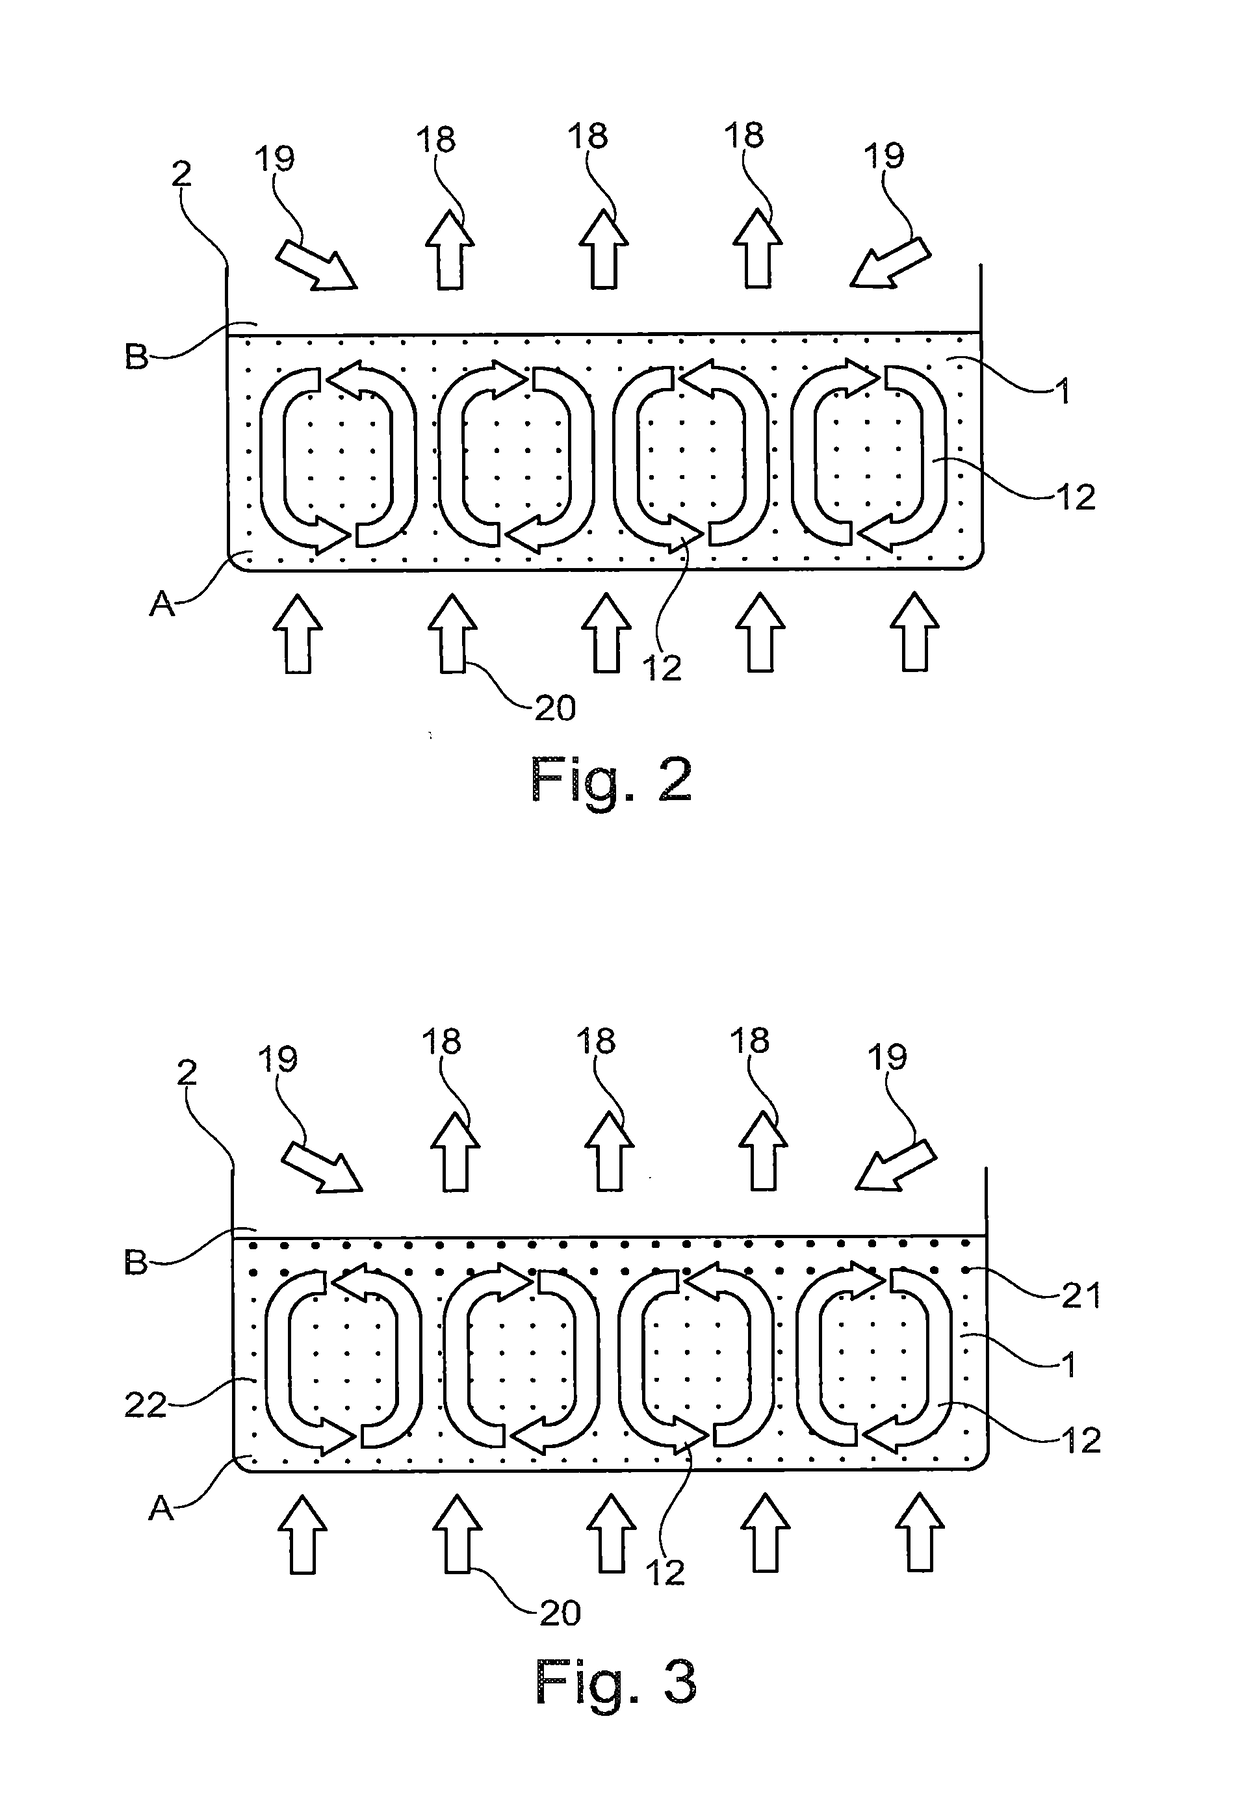 Process For Producing A Polychromic And/Or Spatially Polychromic Or A Monochrome-Colored Ceramic Body And Device For This Purpose